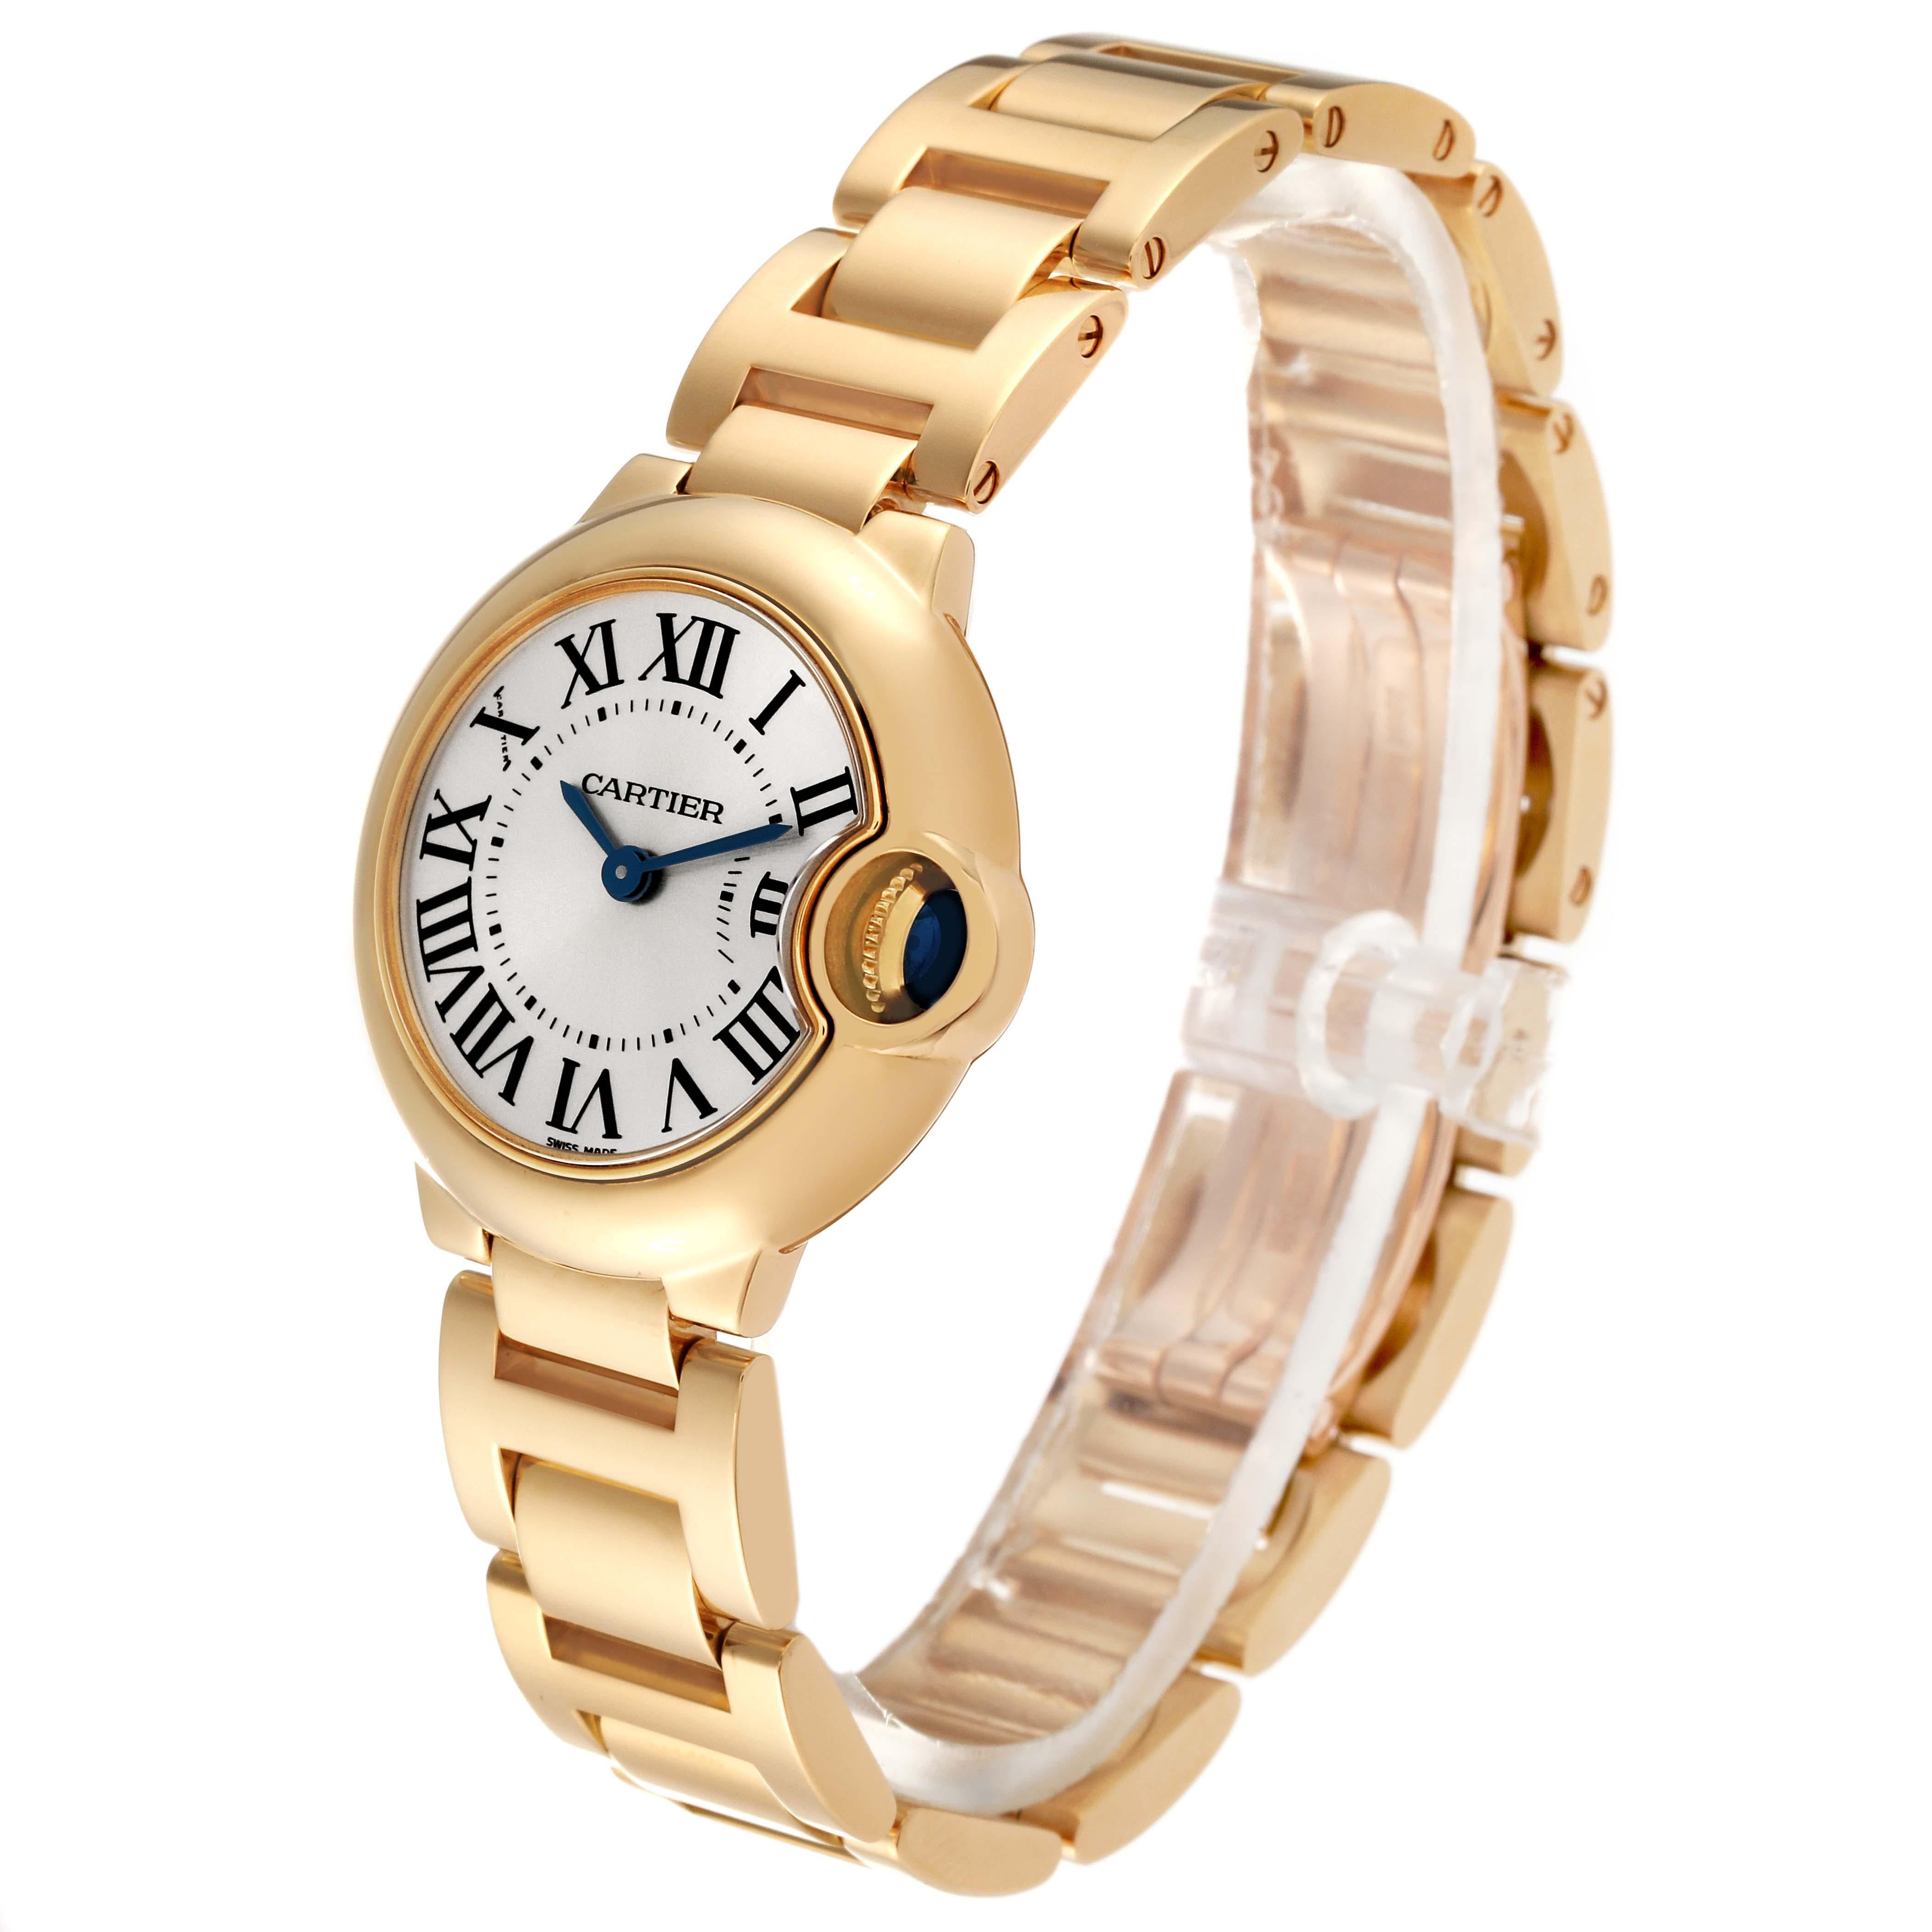 Cartier Ballon Bleu Yellow Gold Ladies Watch W69001Z2 Box Papers In Excellent Condition For Sale In Atlanta, GA